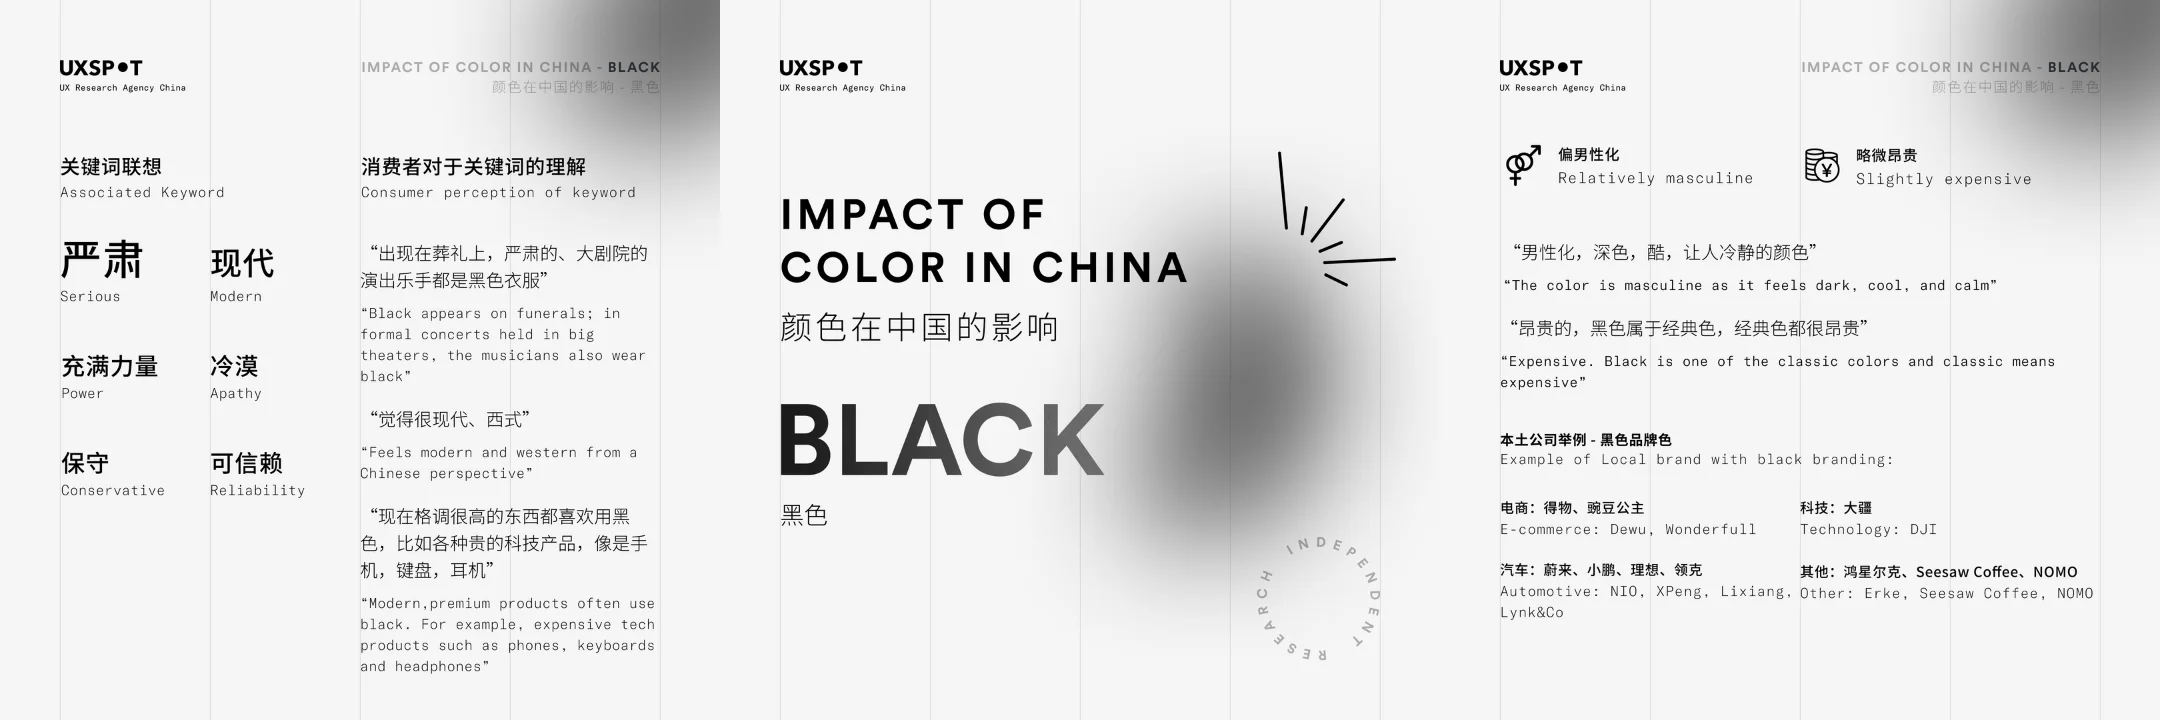 color psychology China color black data summary